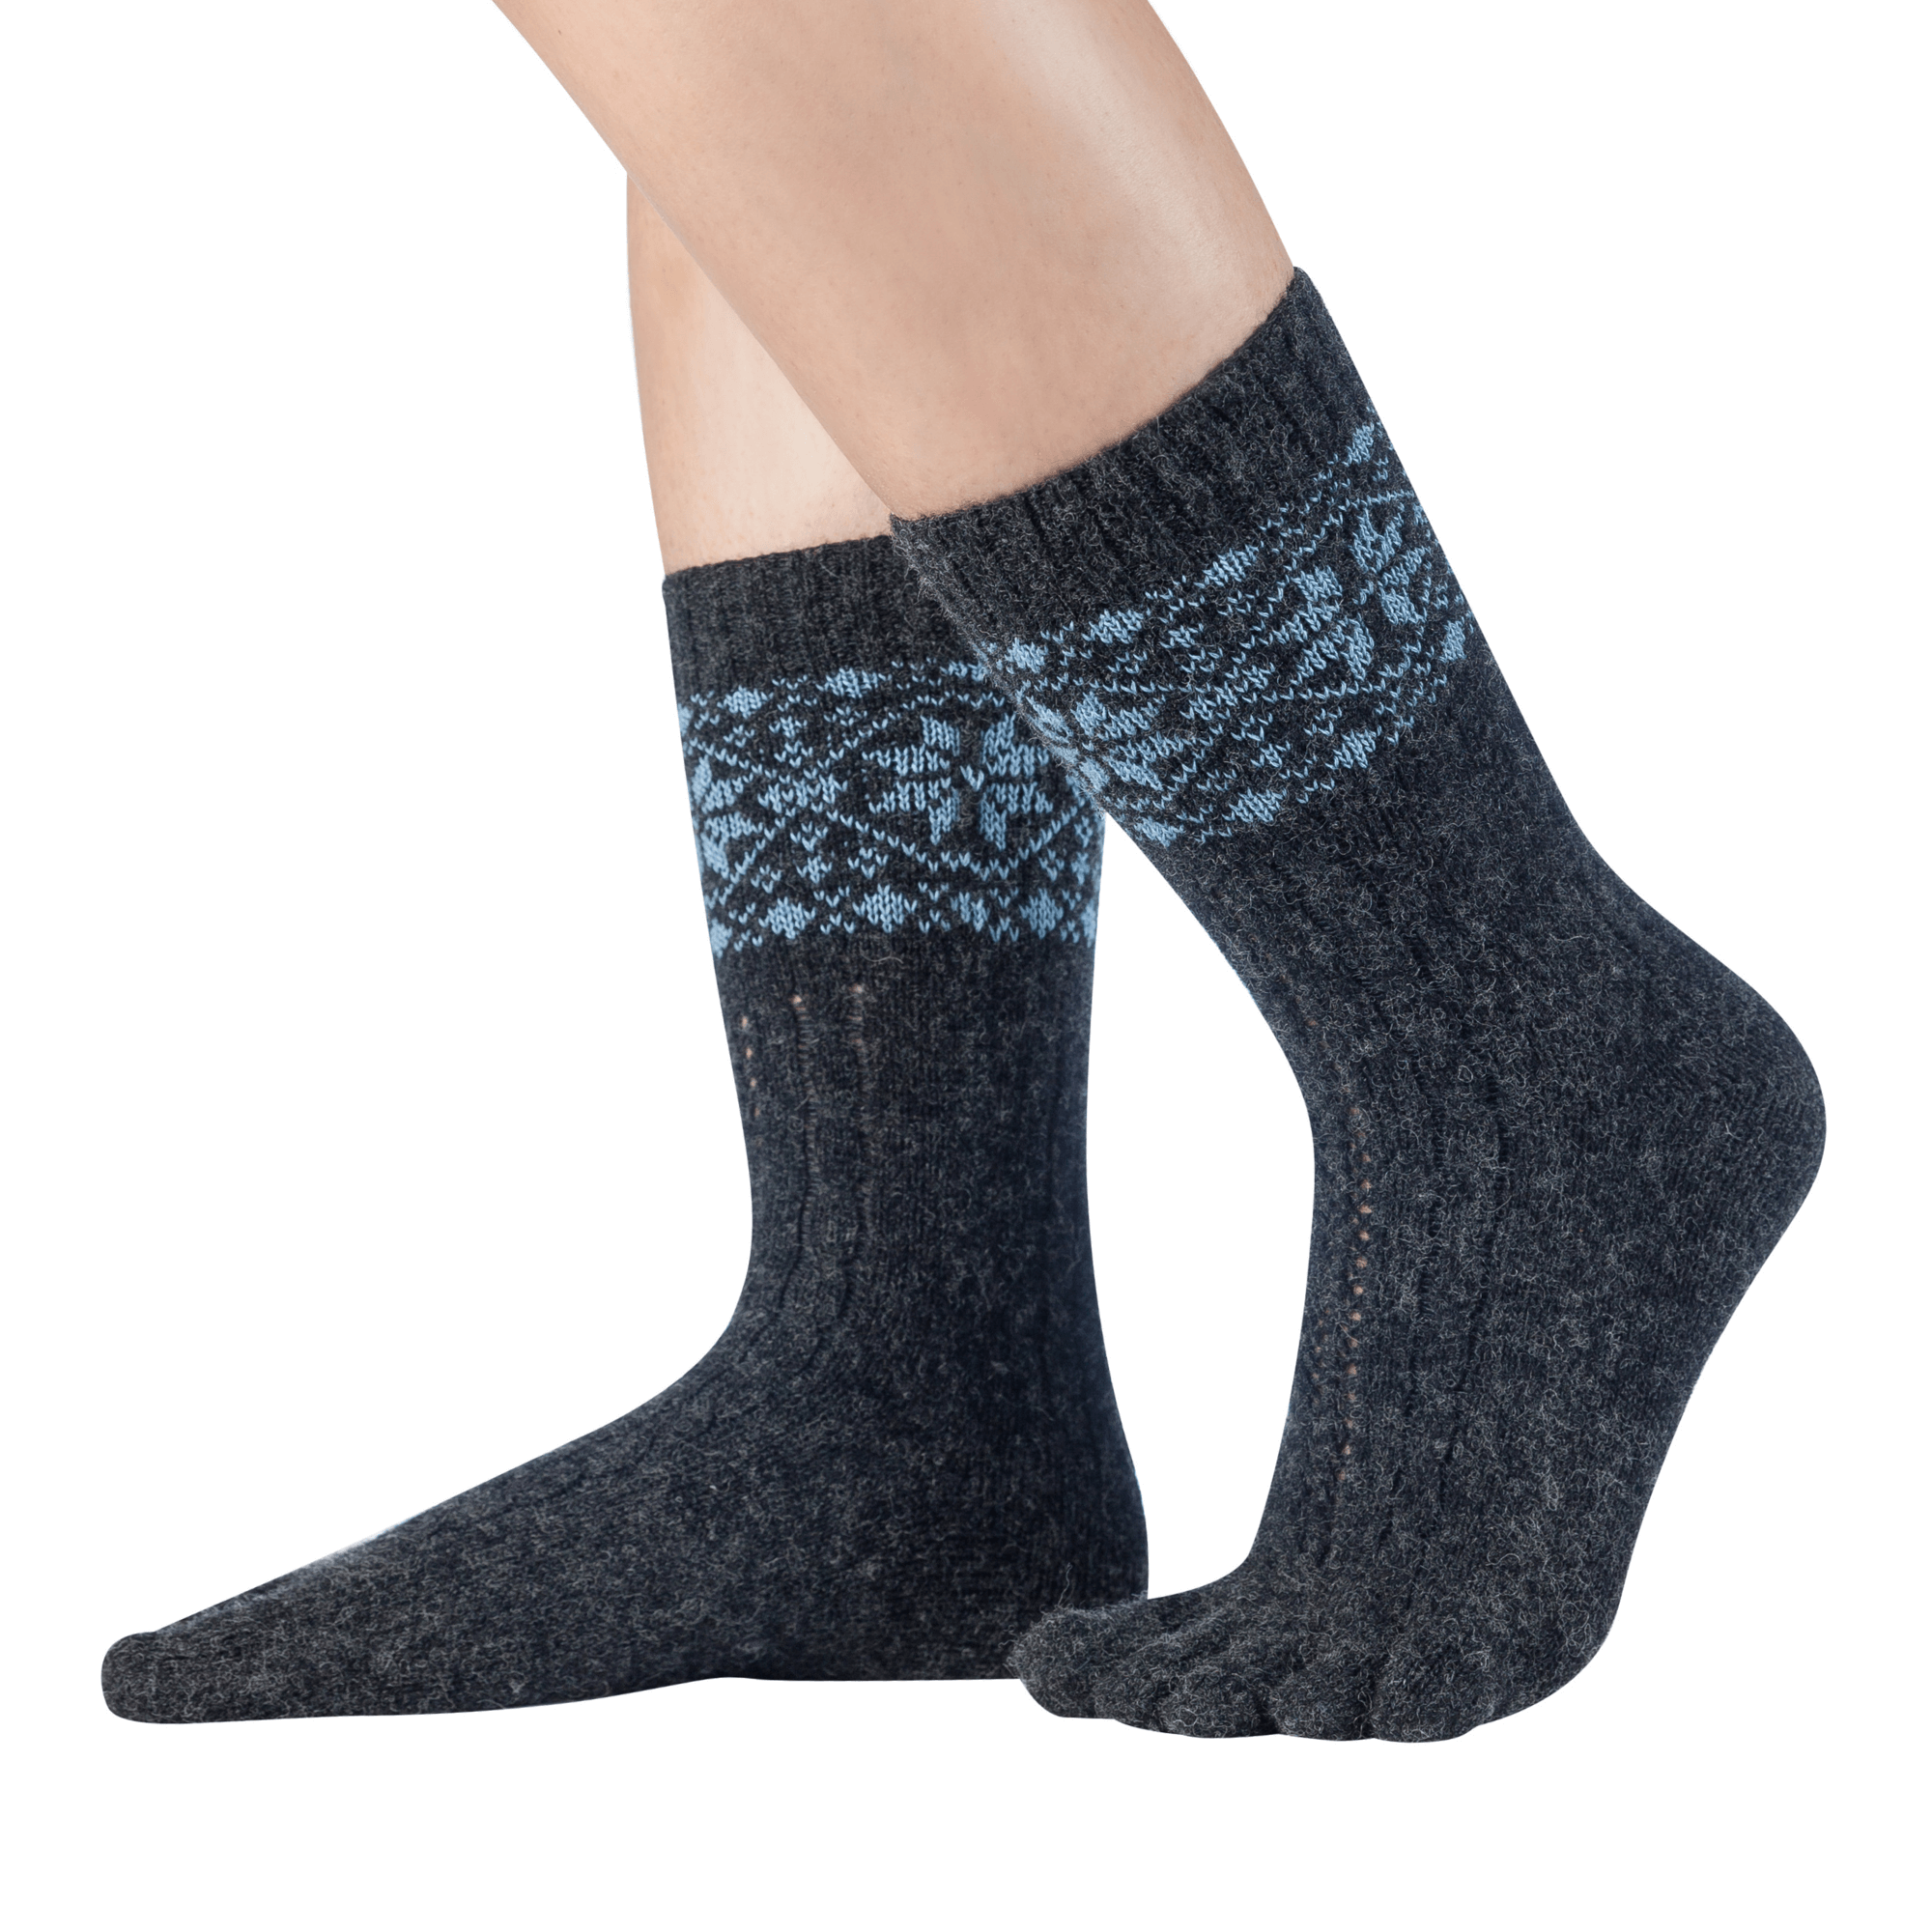  Knitido warm merino & cashmere toe socks with snow patches pattern in anthracite/blue